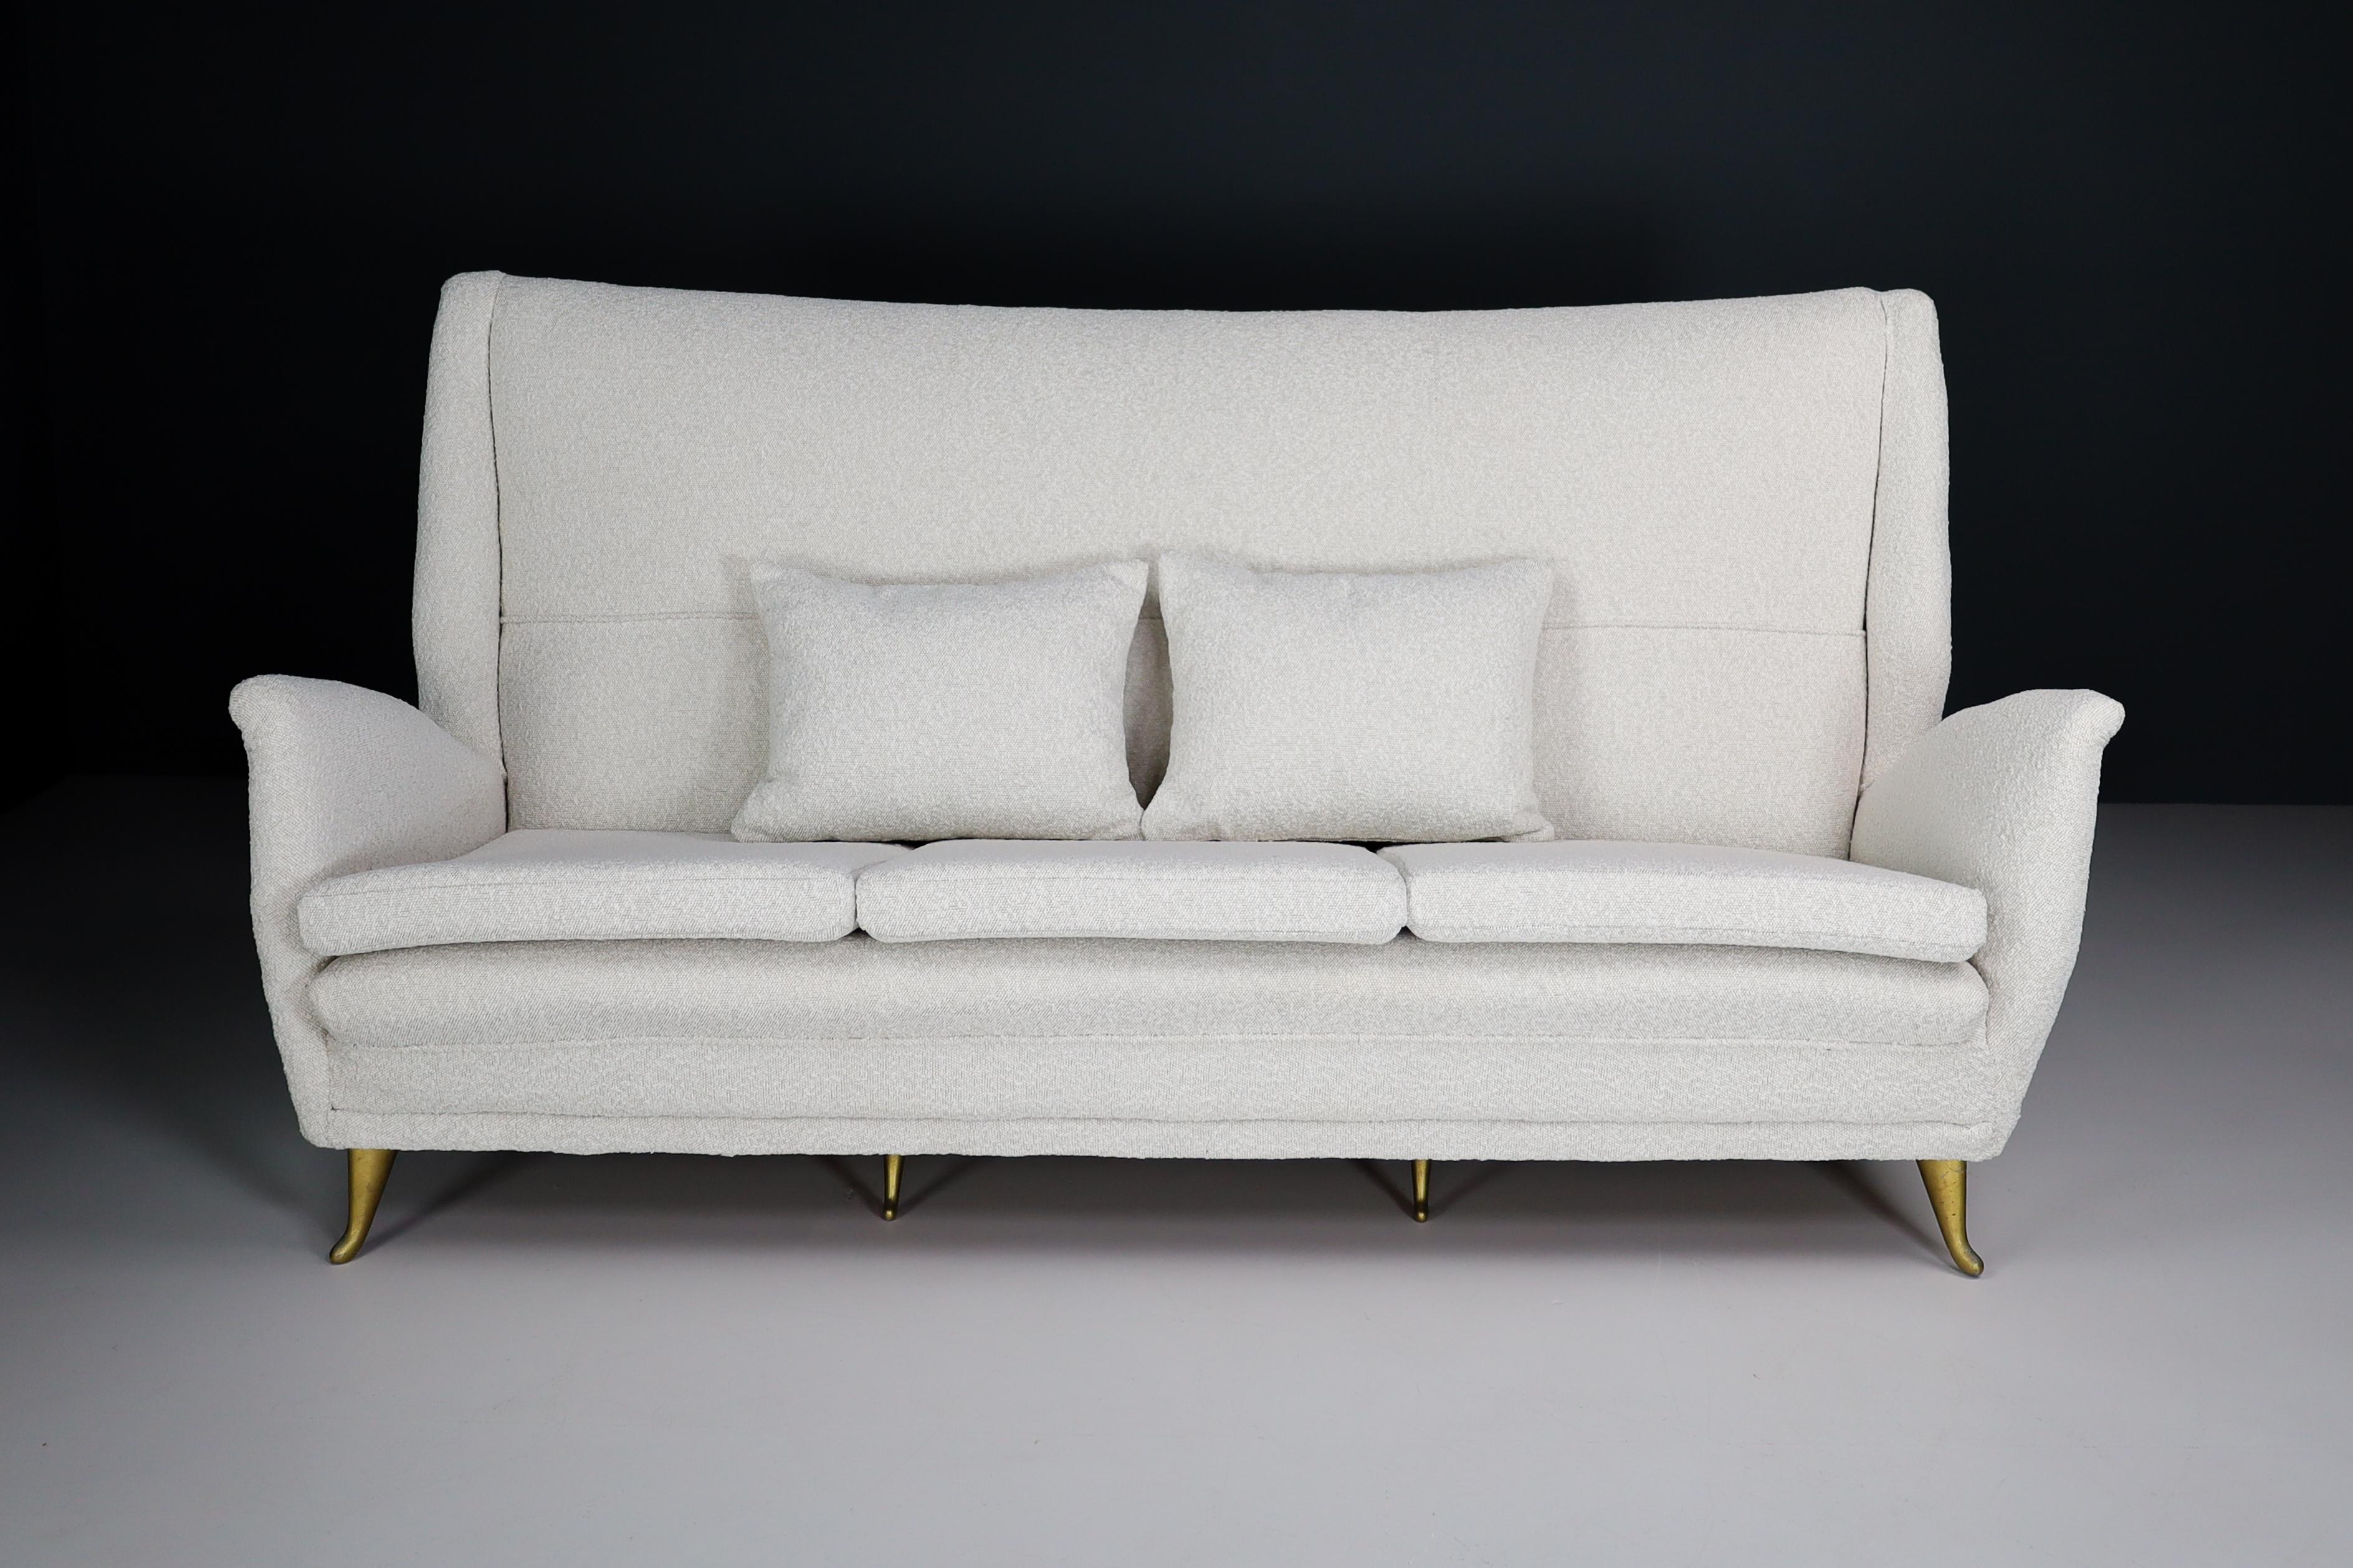 Italian High Back Sofa By Gio Ponti For ISA Bergamo in Bouclé Fabric Upholstery 1950s For Sale